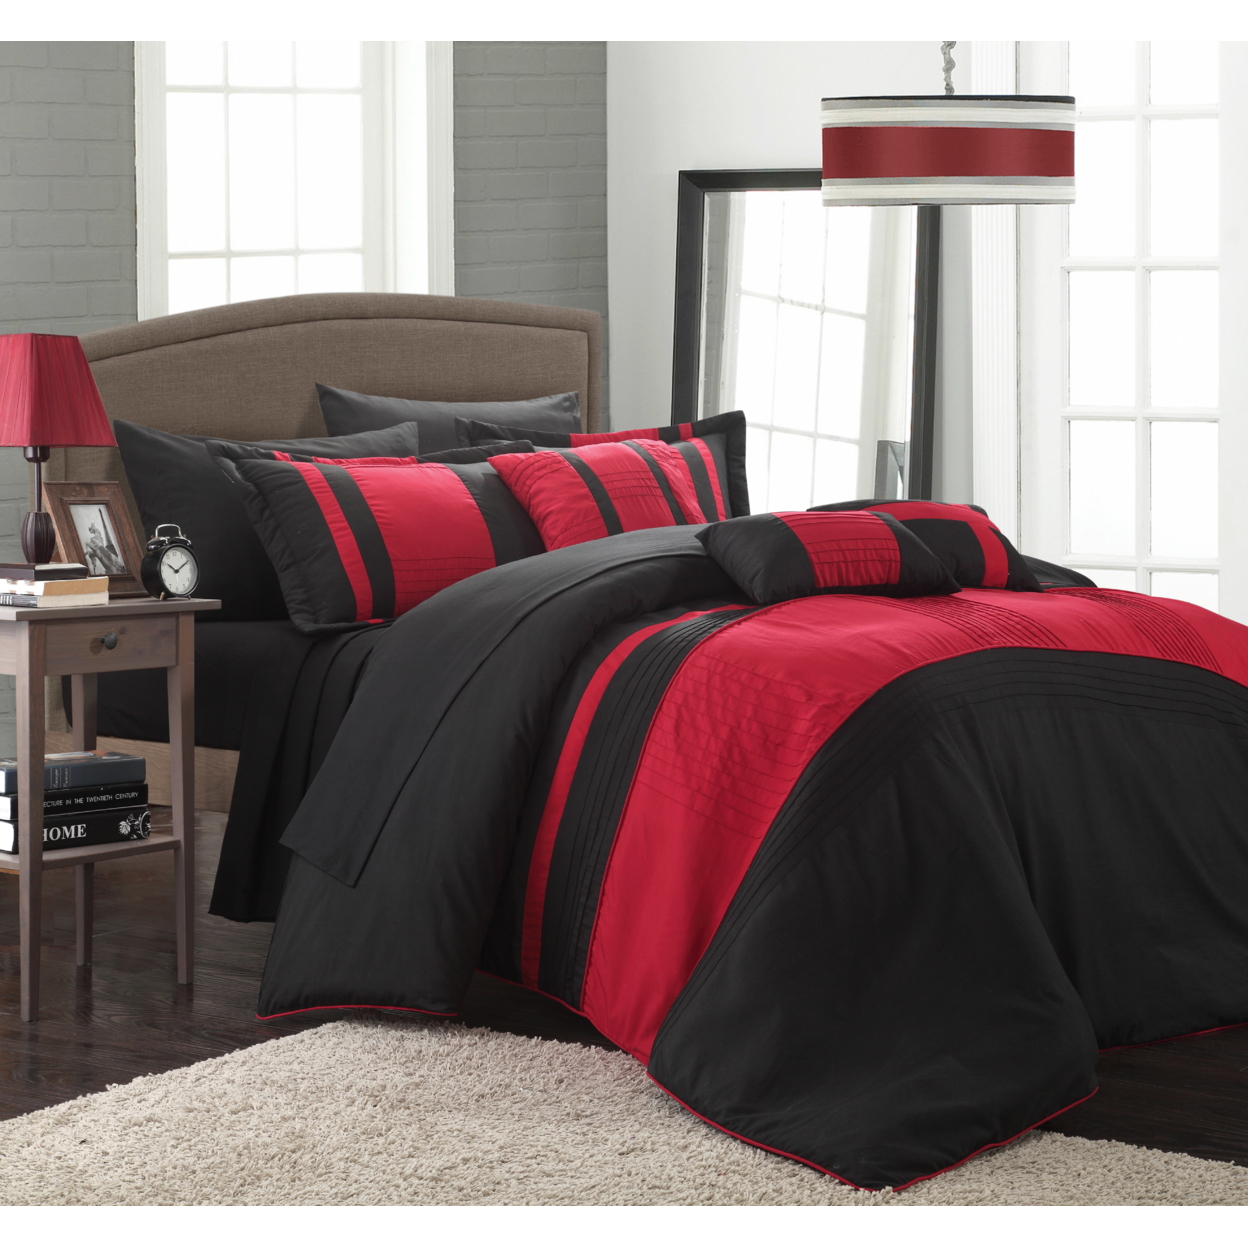 Chic Home Sheila 10-piece Bed-in-a-Bag Comforter Set - Red, King